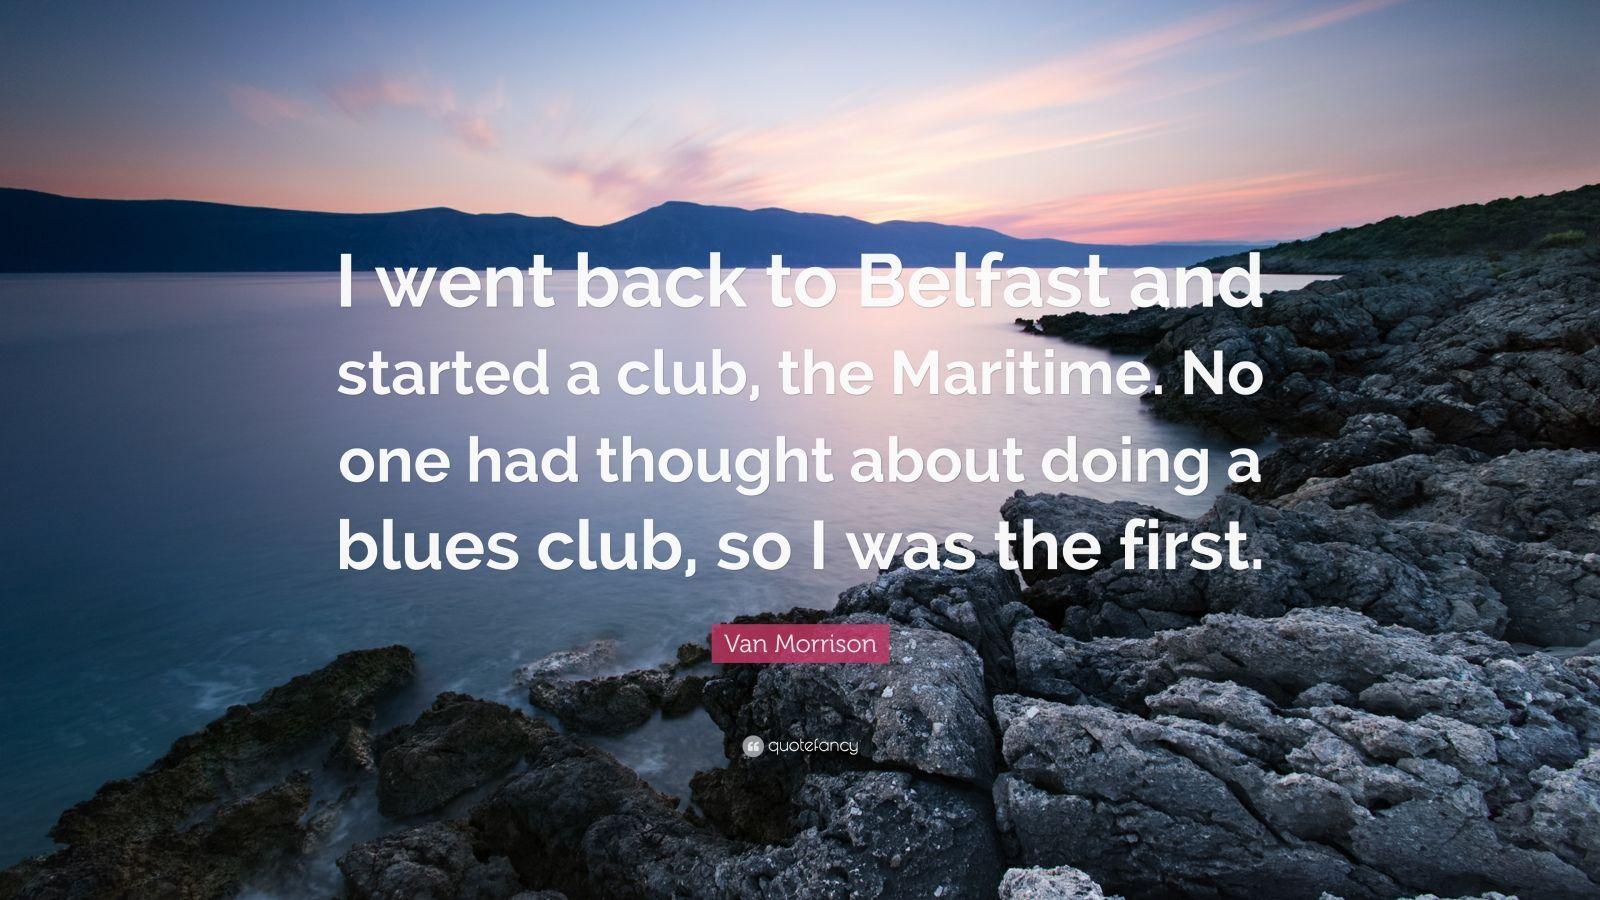 Van Morrison Quote: “I went back to Belfast and started a club